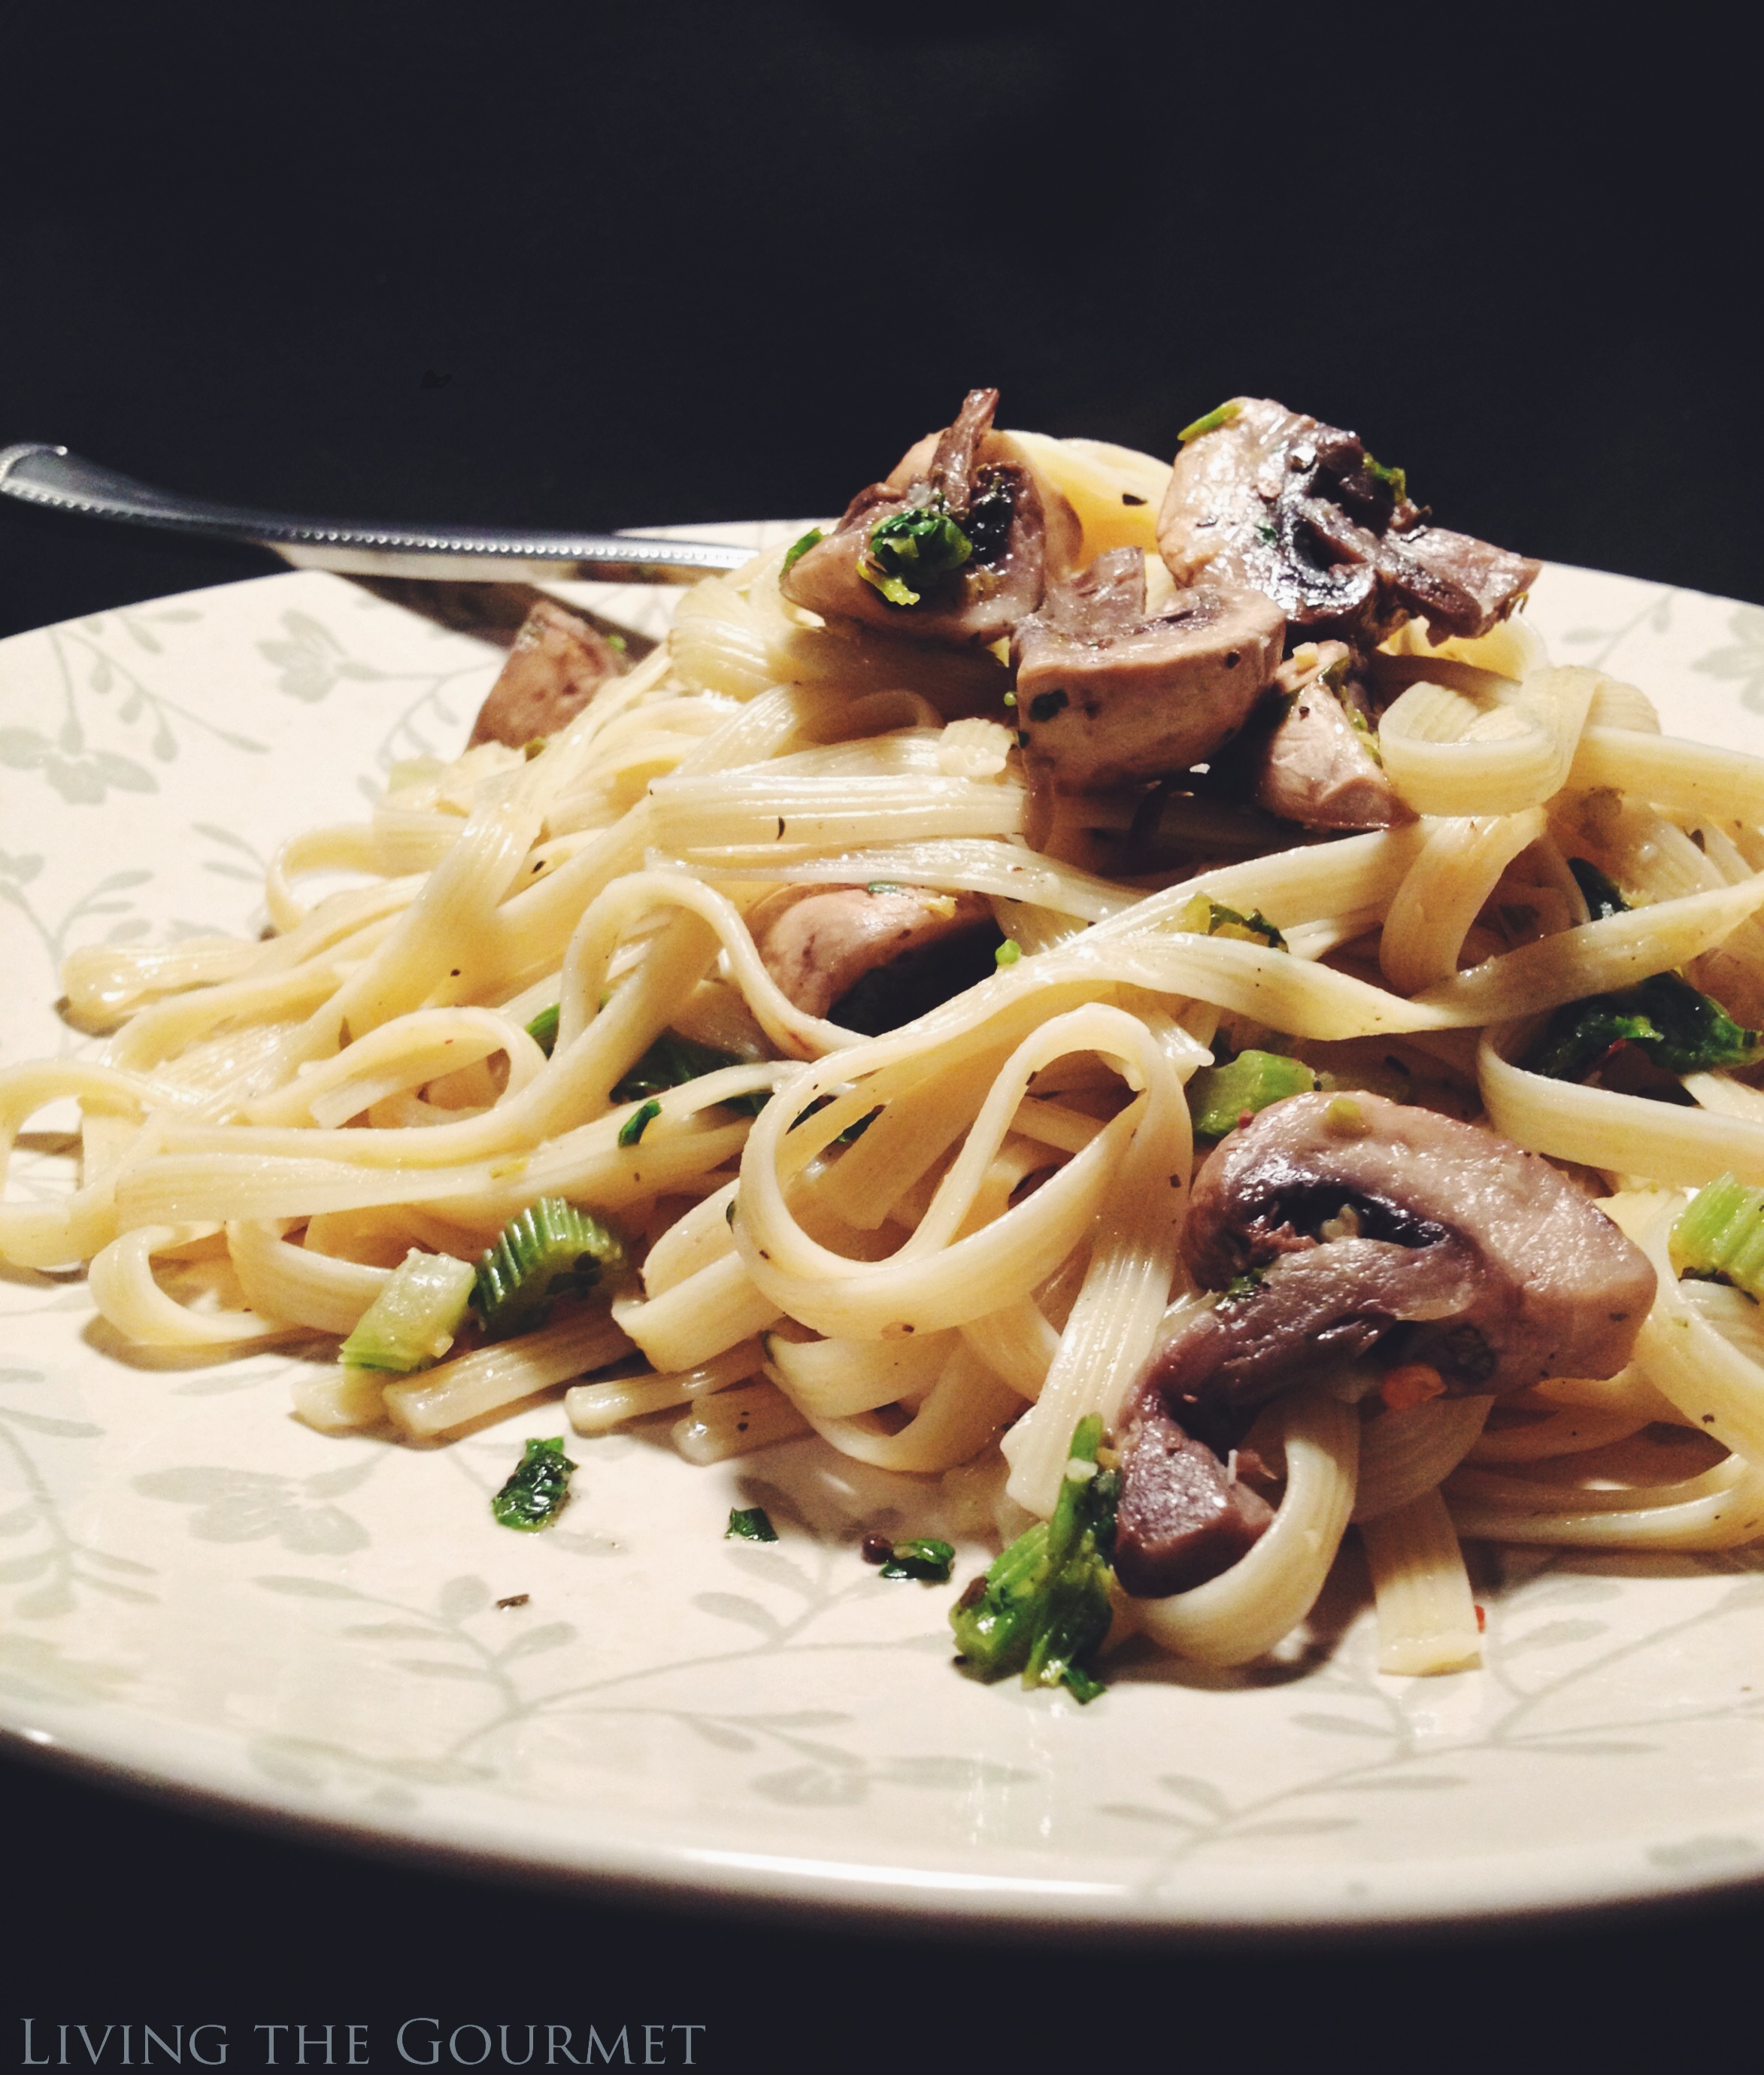 Living the Gourmet: Fettuccini with Mushrooms